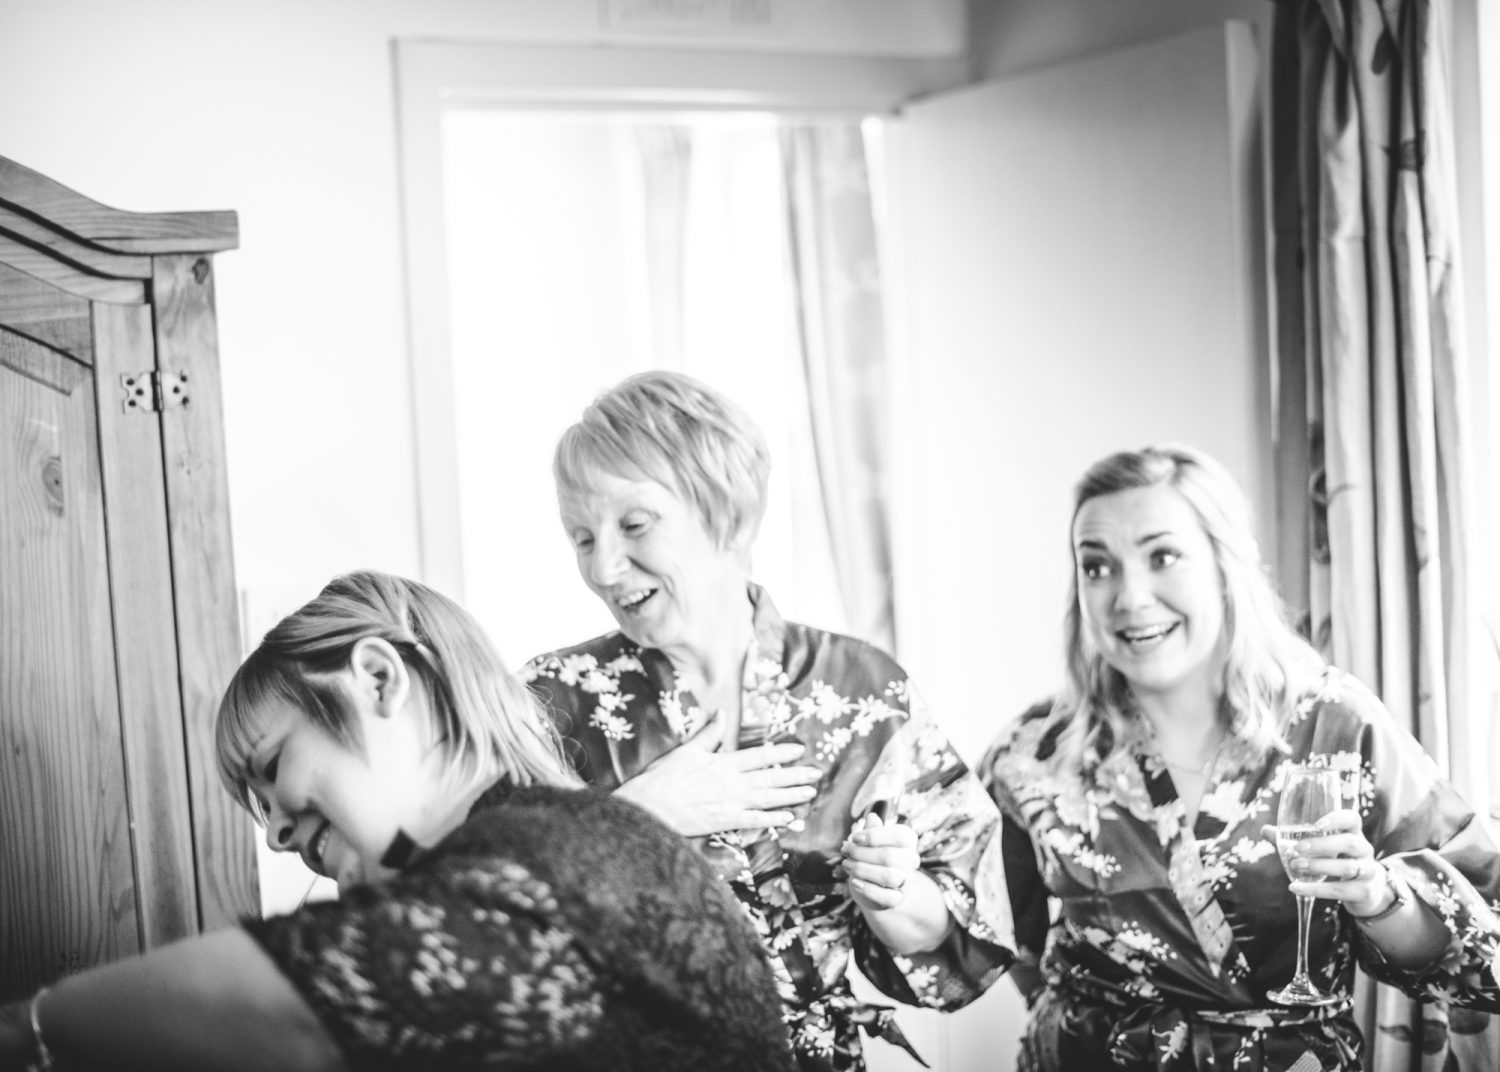 Women having a laugh during preparations